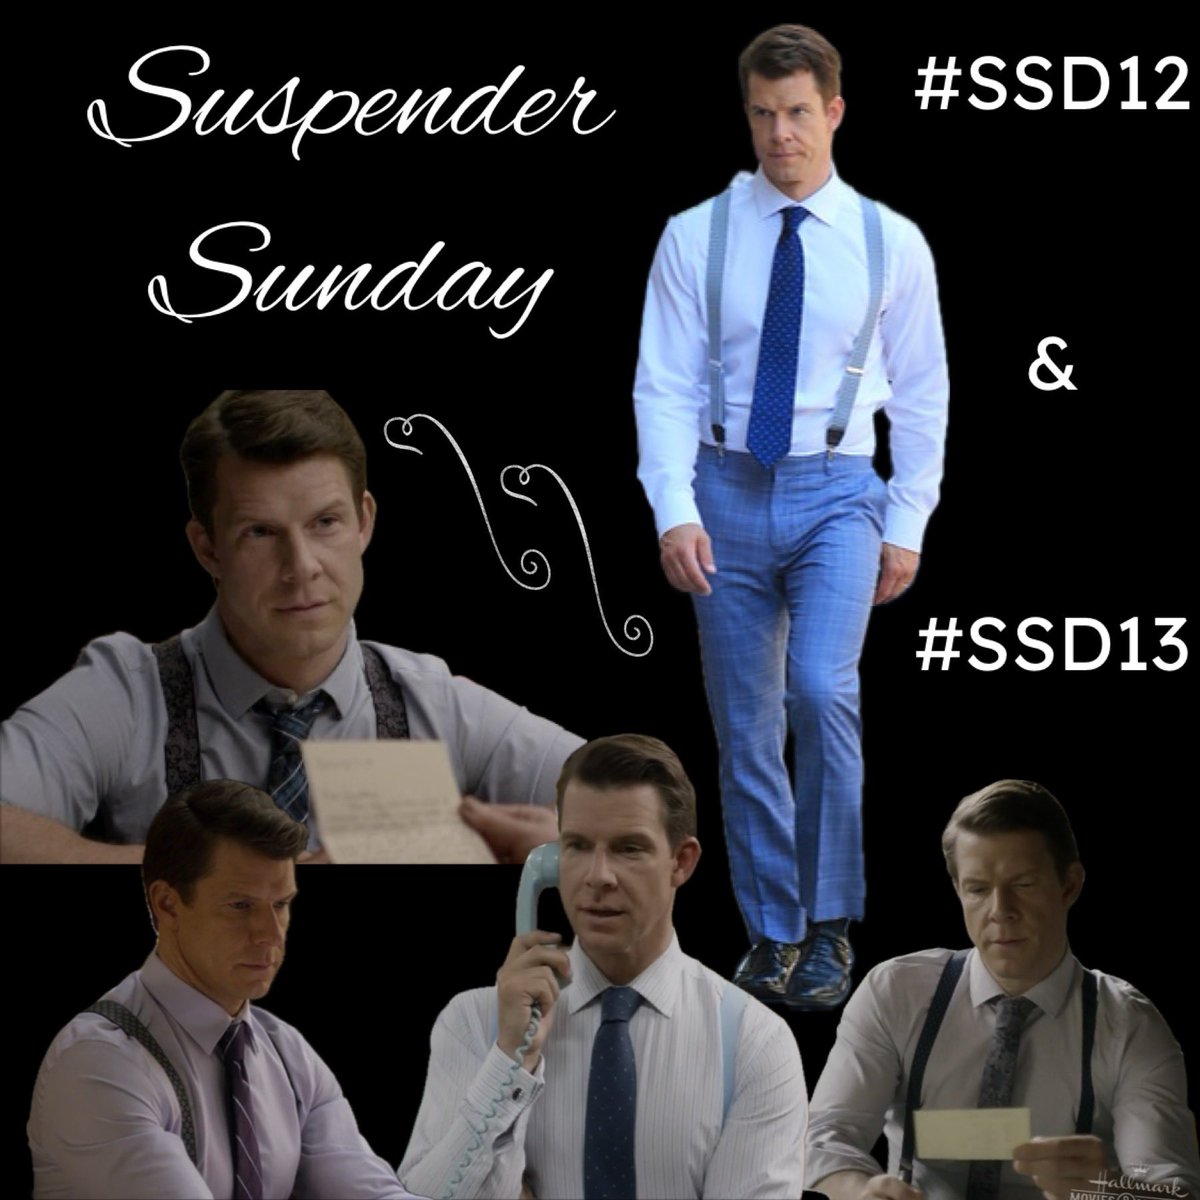 It’s not just the Suspenders that make a character, but the actor himself. @Eric_Mabius and Suspenders make the character Oliver O’Toole of #SignedSealedDelivered 💙 #POstables are anxiously awaiting for new Suspenders in #SSD12 & #SSD13 #SuspenderSunday #LisaHamiltonDaly